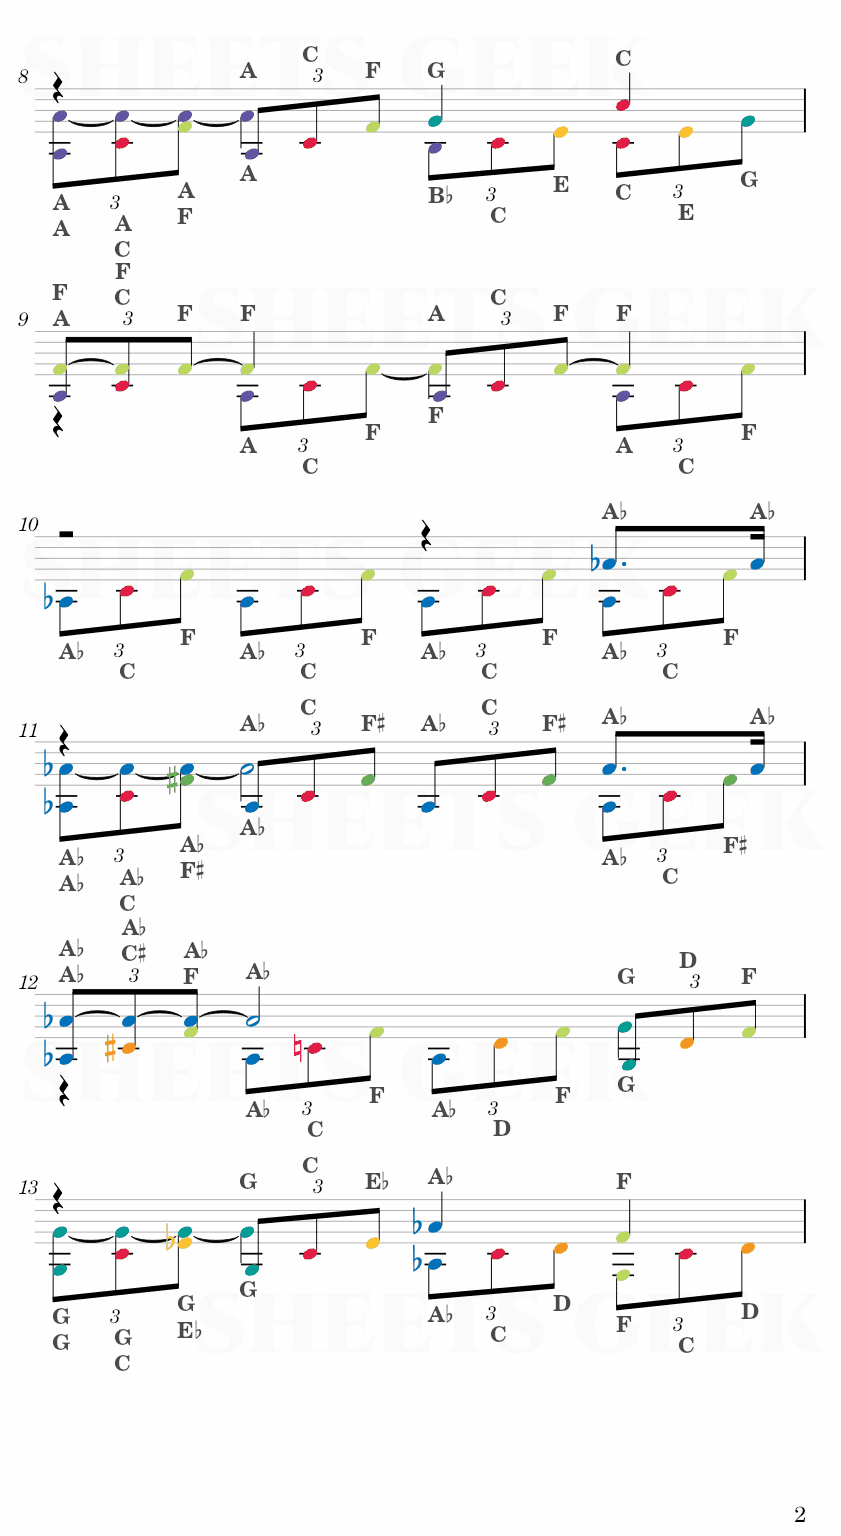 Moonlight Sonata 1st Movement - Ludwig Van Beethoven Easy Sheet Music Free for piano, keyboard, flute, violin, sax, cello page 2